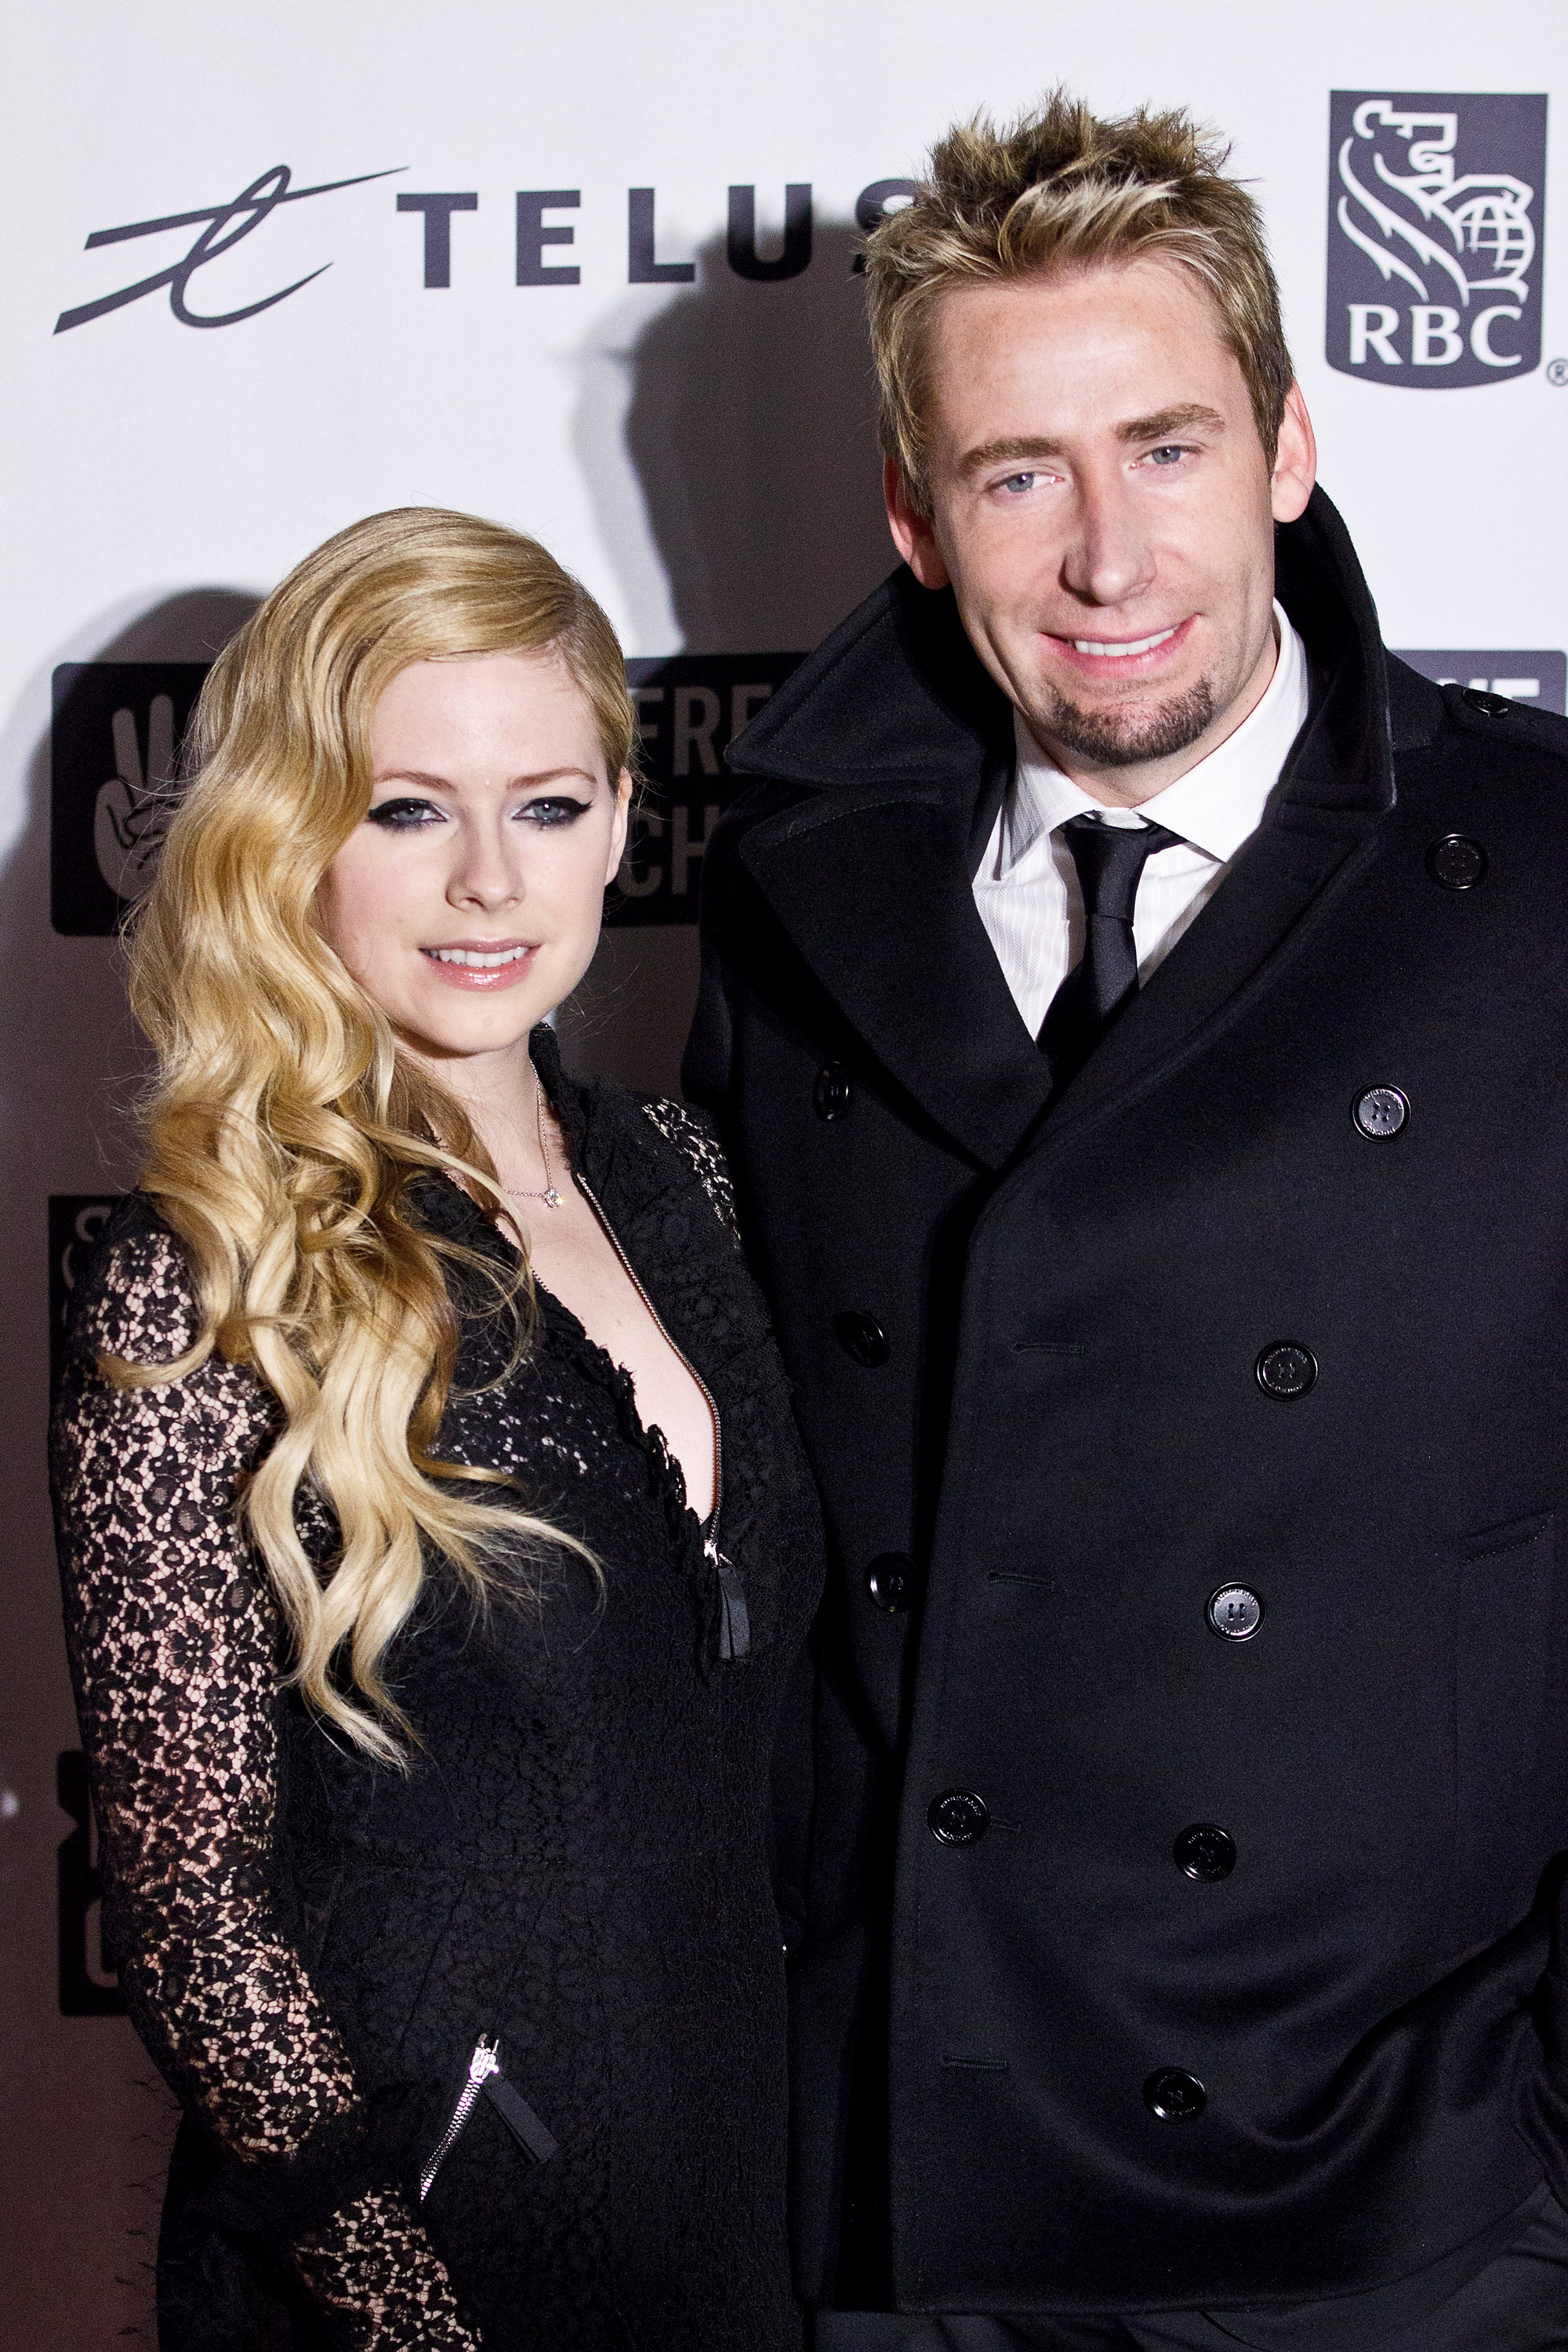 Avril Lavigne and Chad Kroeger at "We Day" event in Vancouver on Oct. 18, 2013.